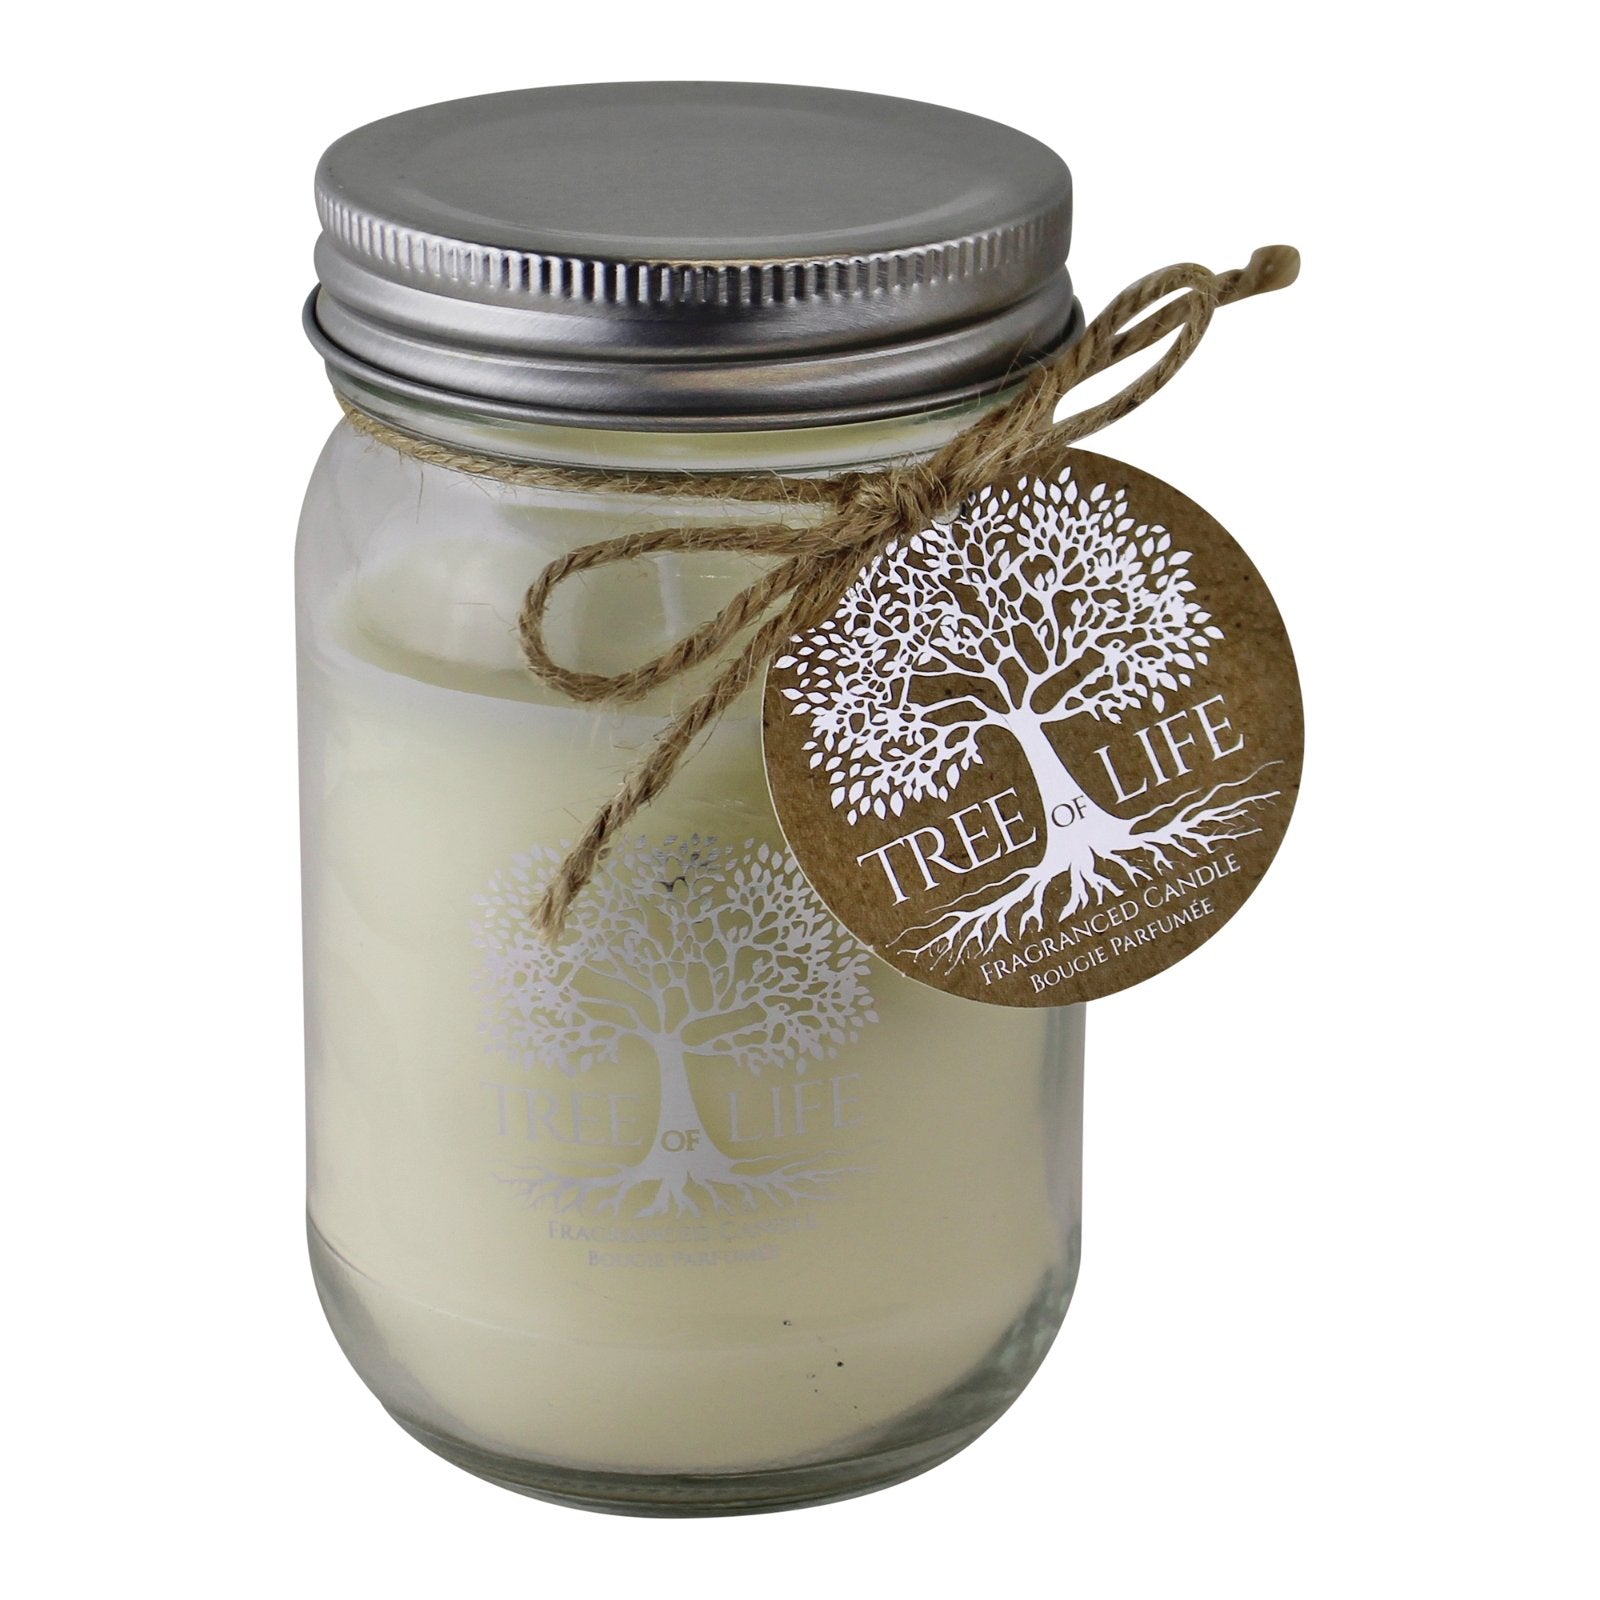 Tree Of Life Fragranced Candle In Glass Jar With Lid - Kaftan direct